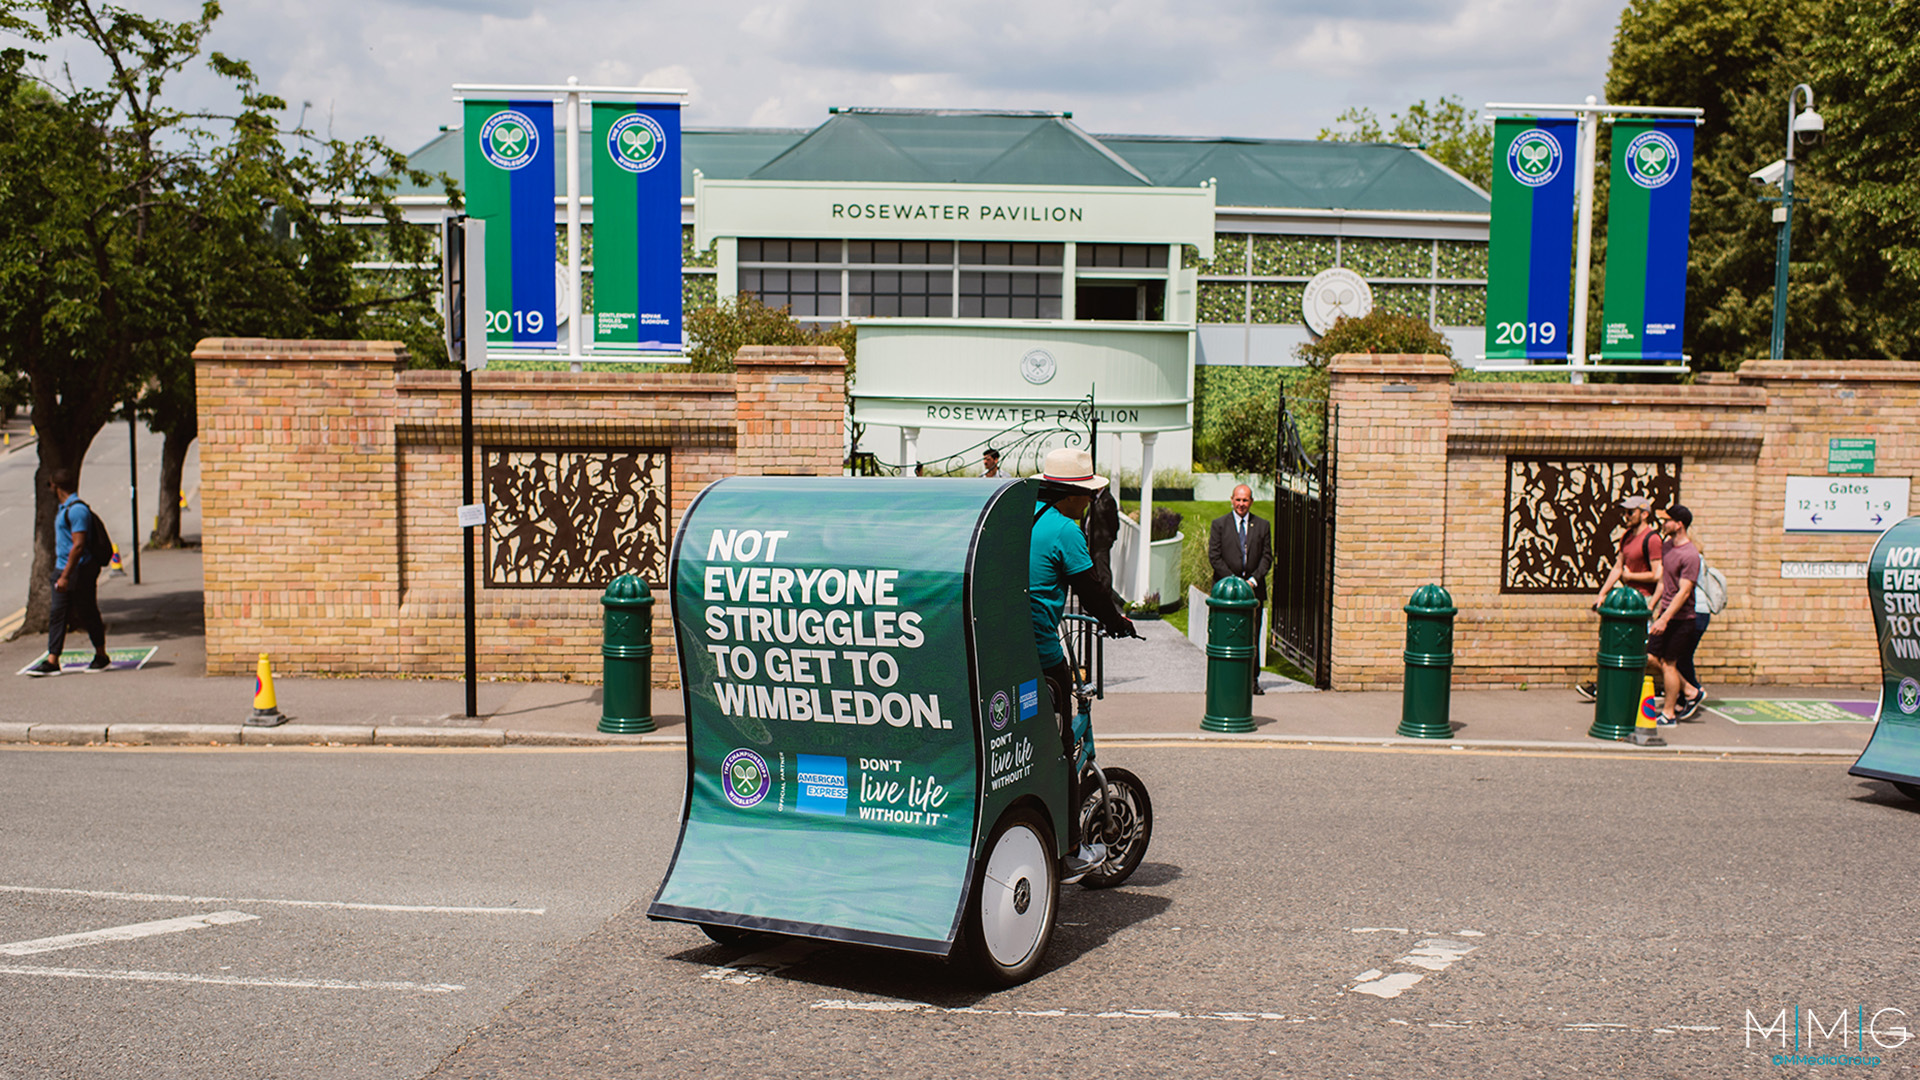 American Express using Pedicabs for event targeting